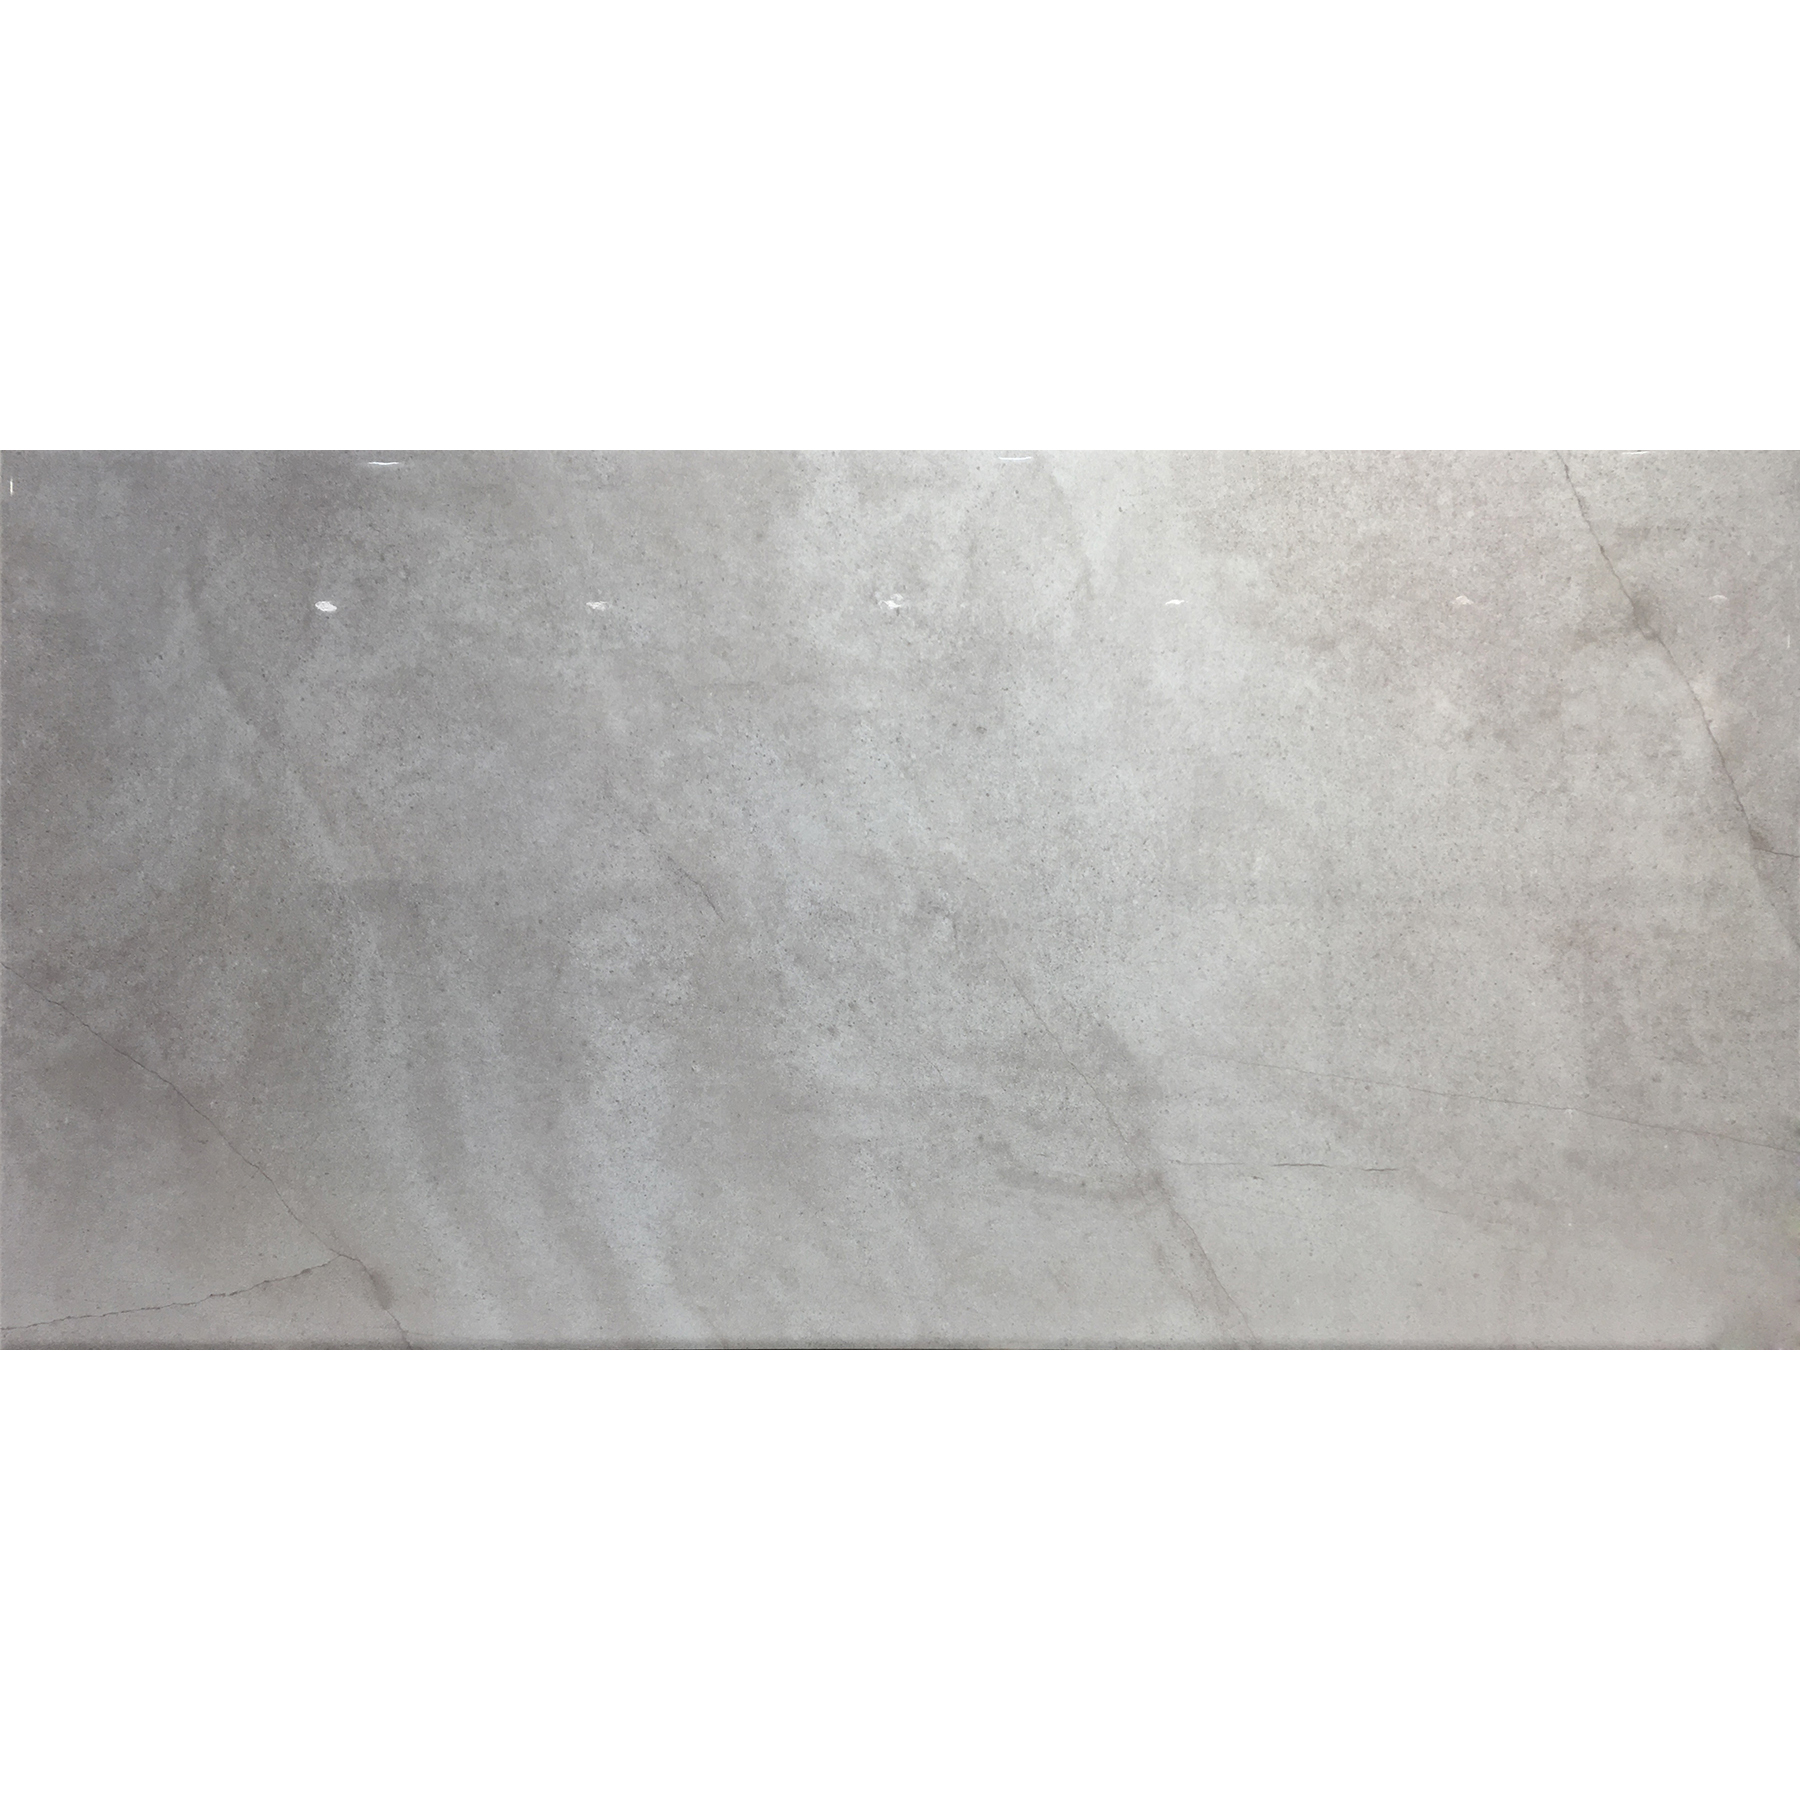 1561 Series 300*600mm Wall Tile Stone